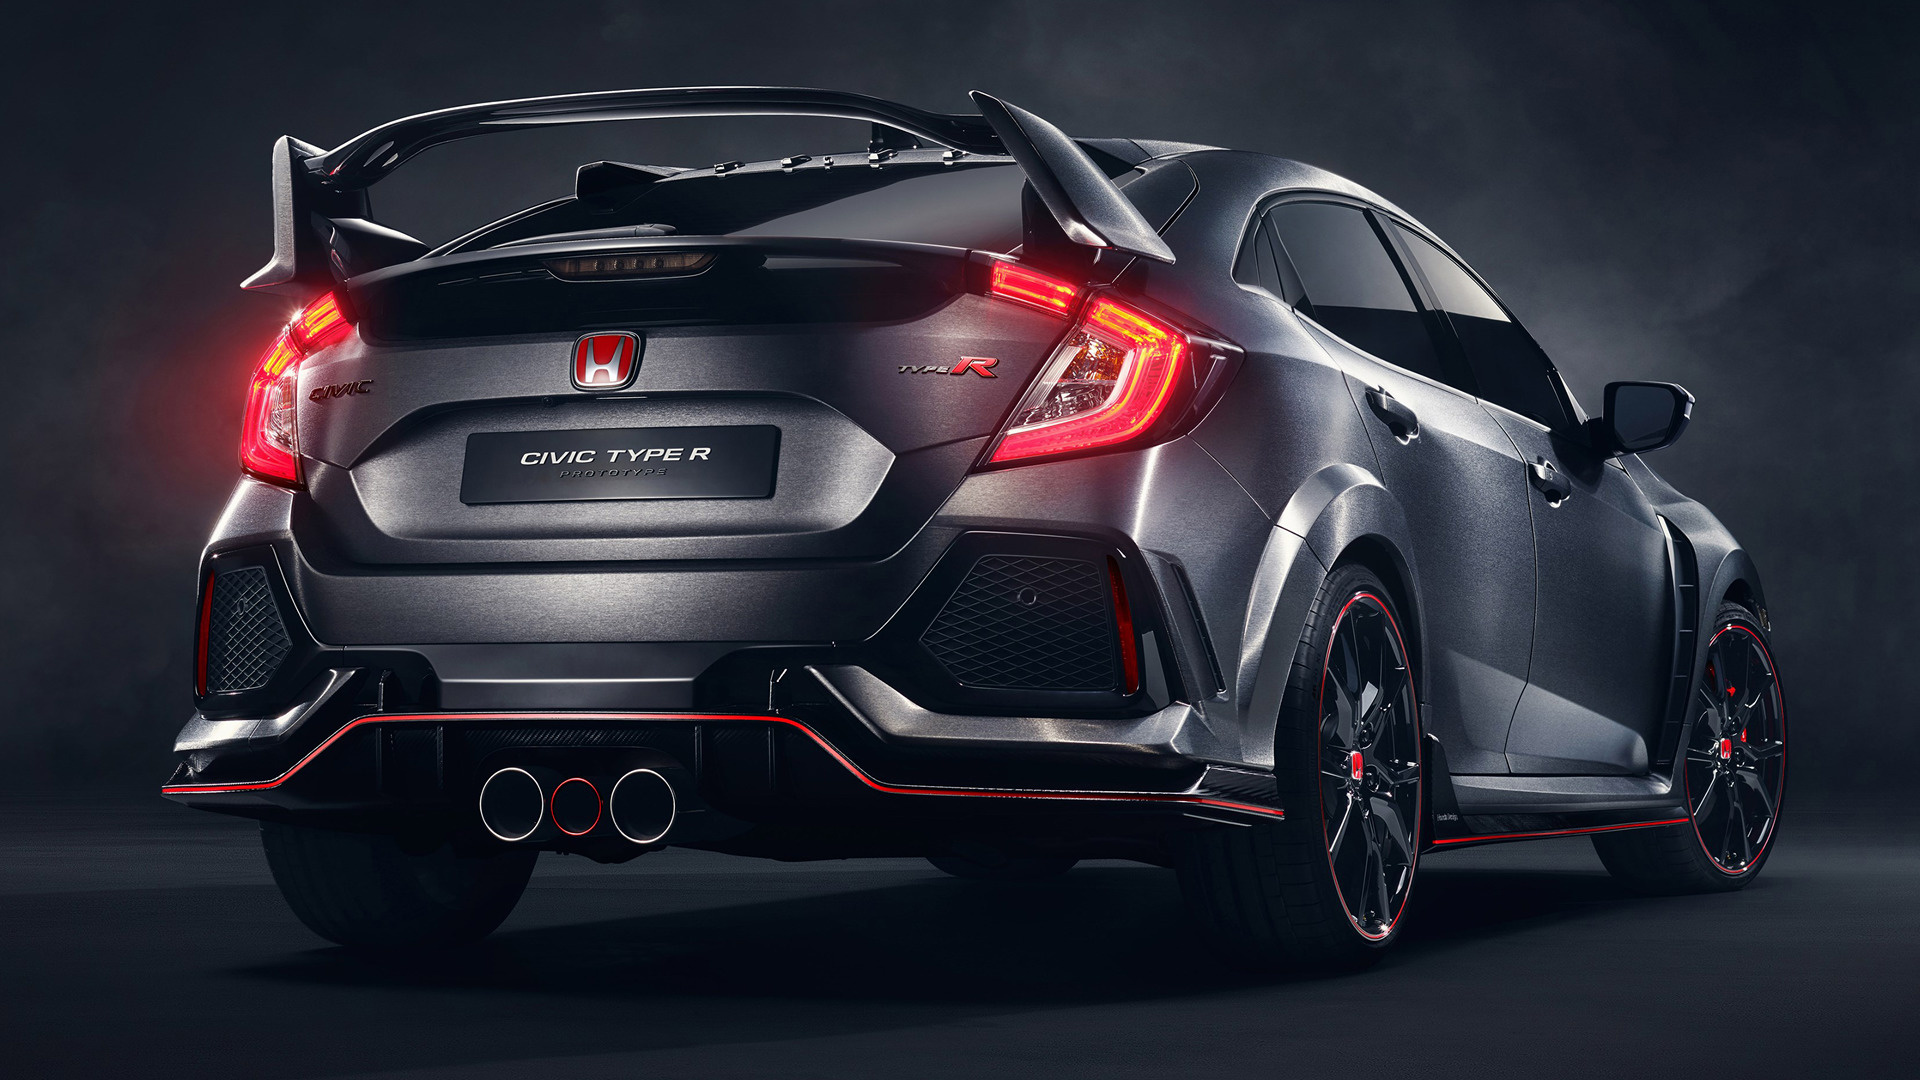 2016 Honda Civic Type R Prototype - Wallpapers and HD Images | Car Pixel